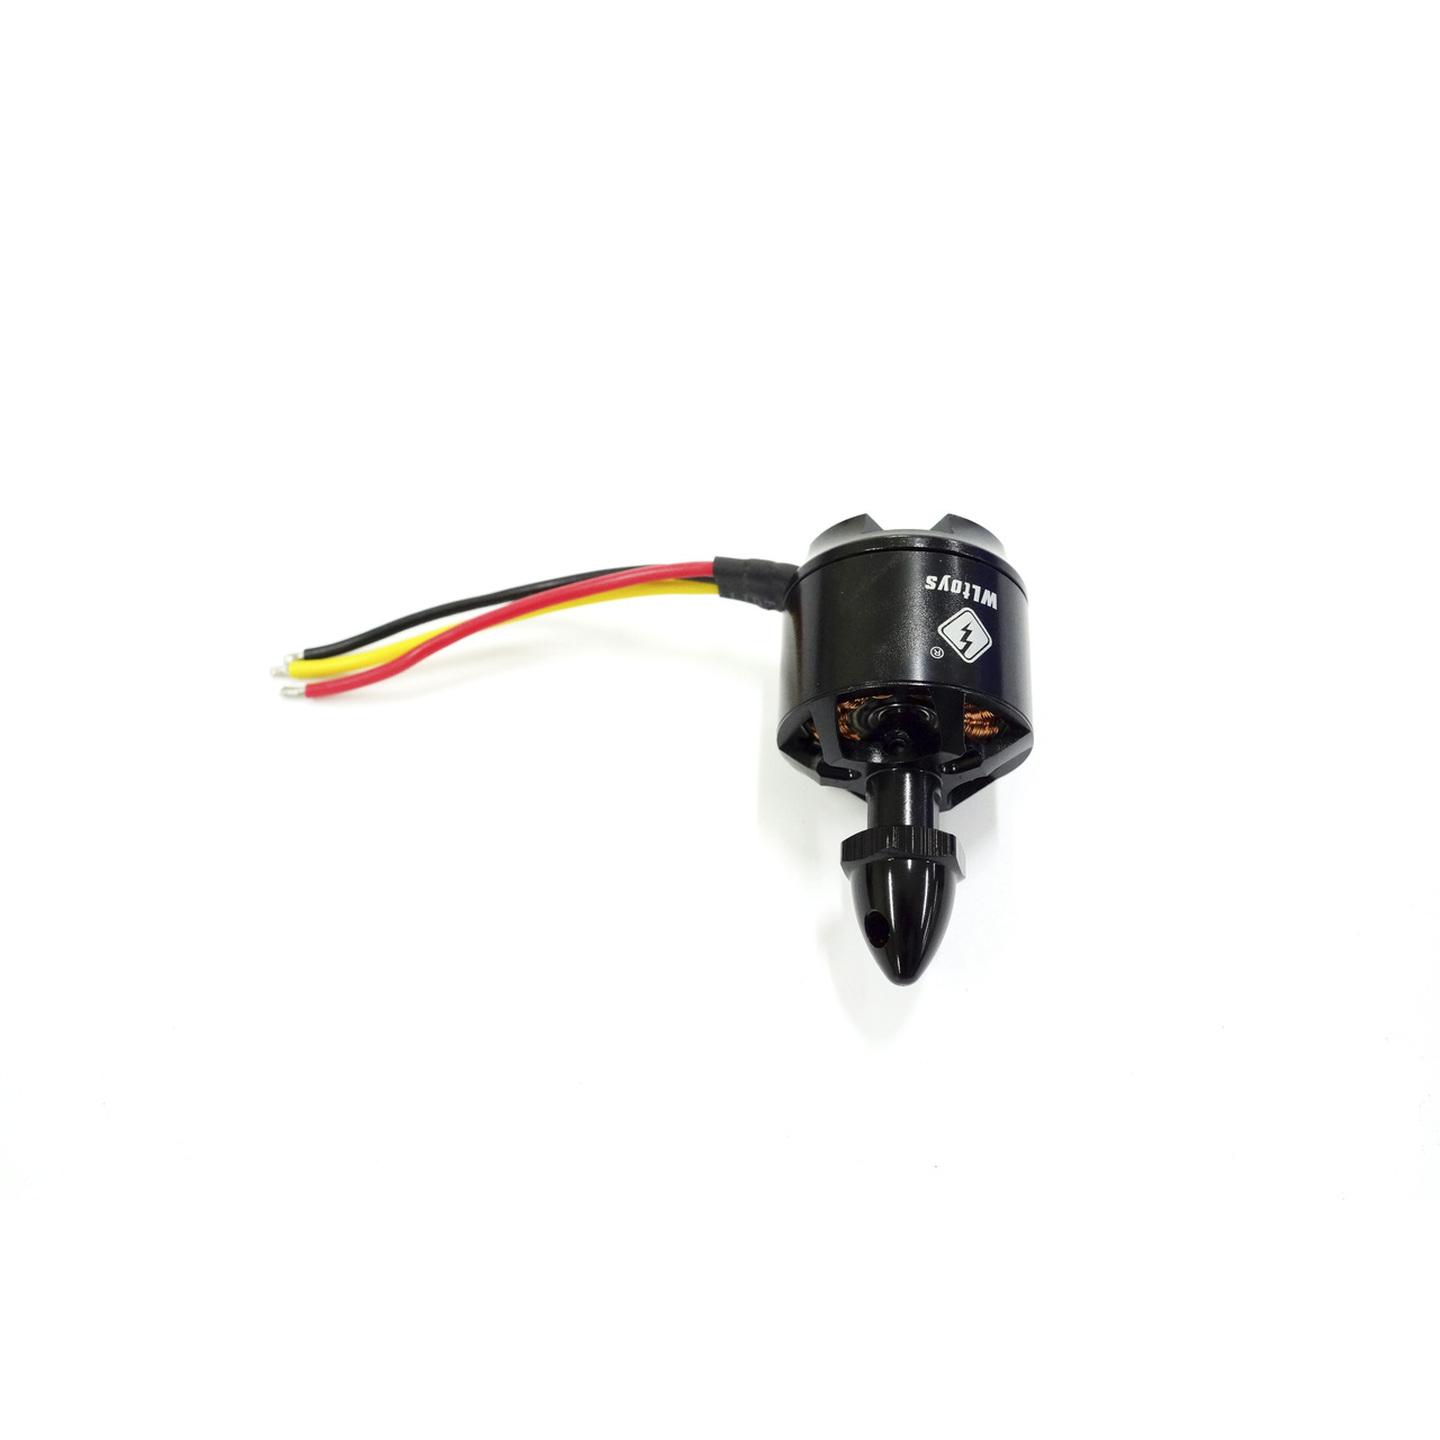 Spare Reverse Motor to suit GT-4040 Quadcopter